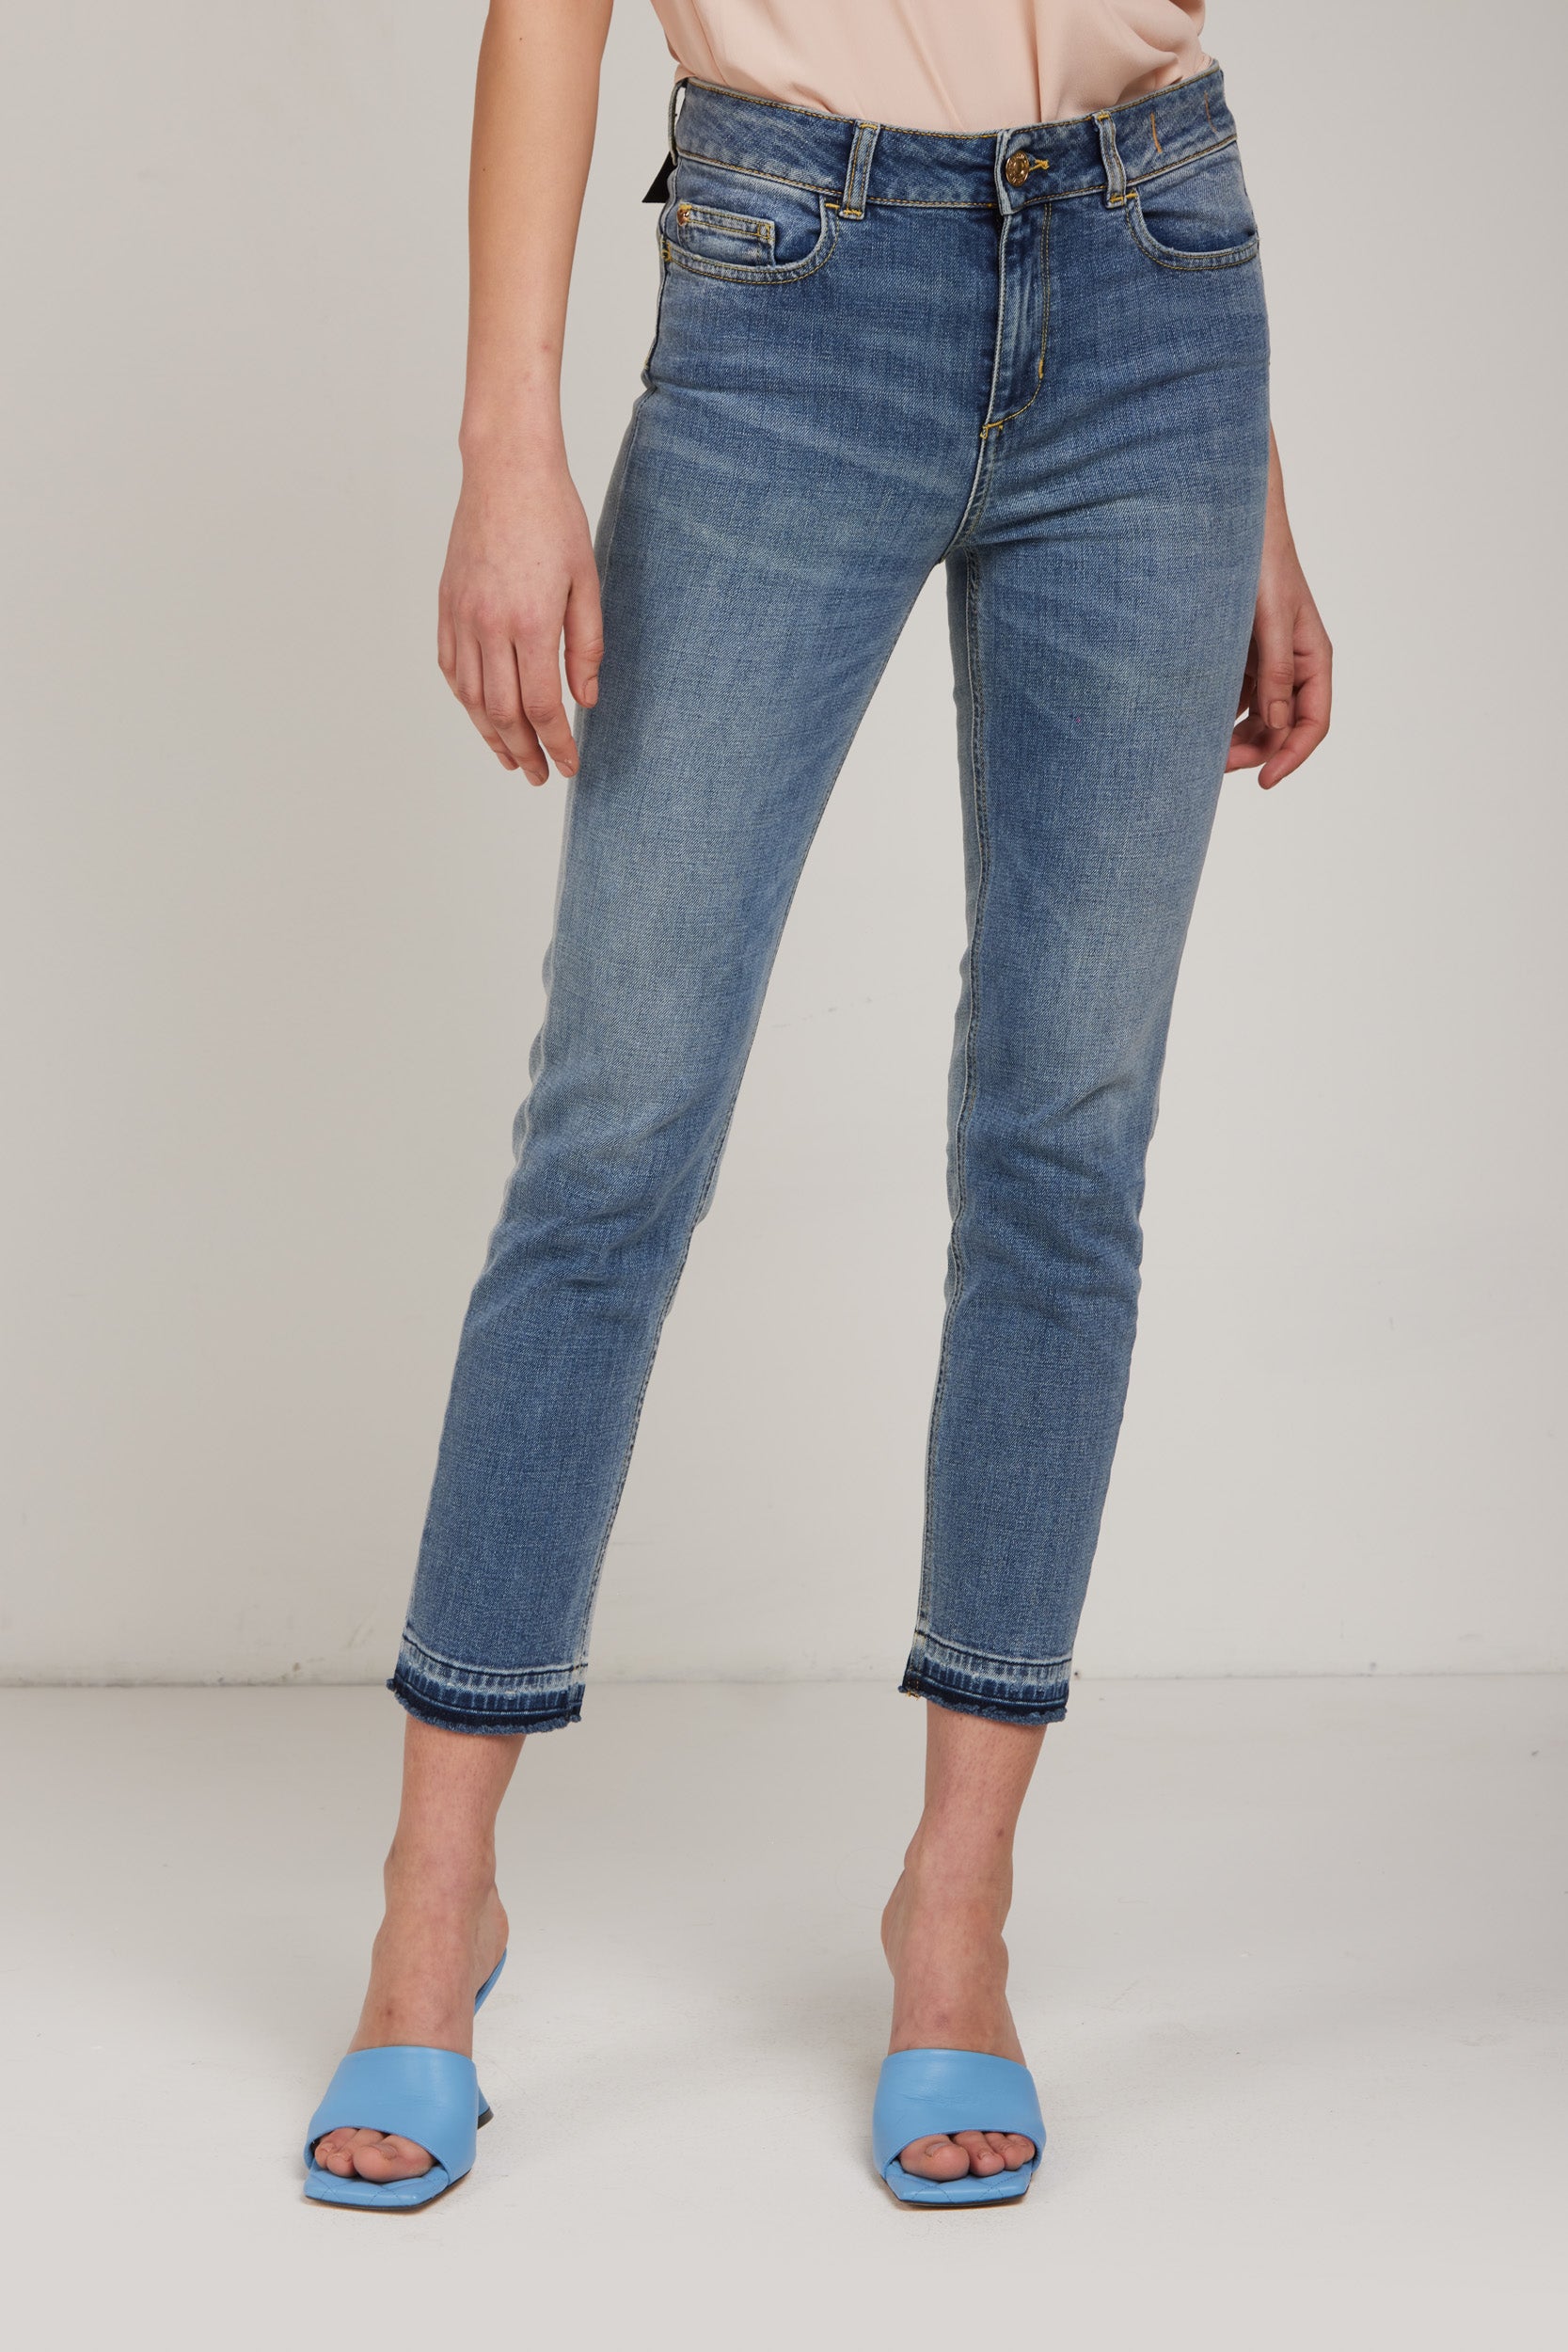 TWINSET Skinny Jeans mit doppelter Waschung